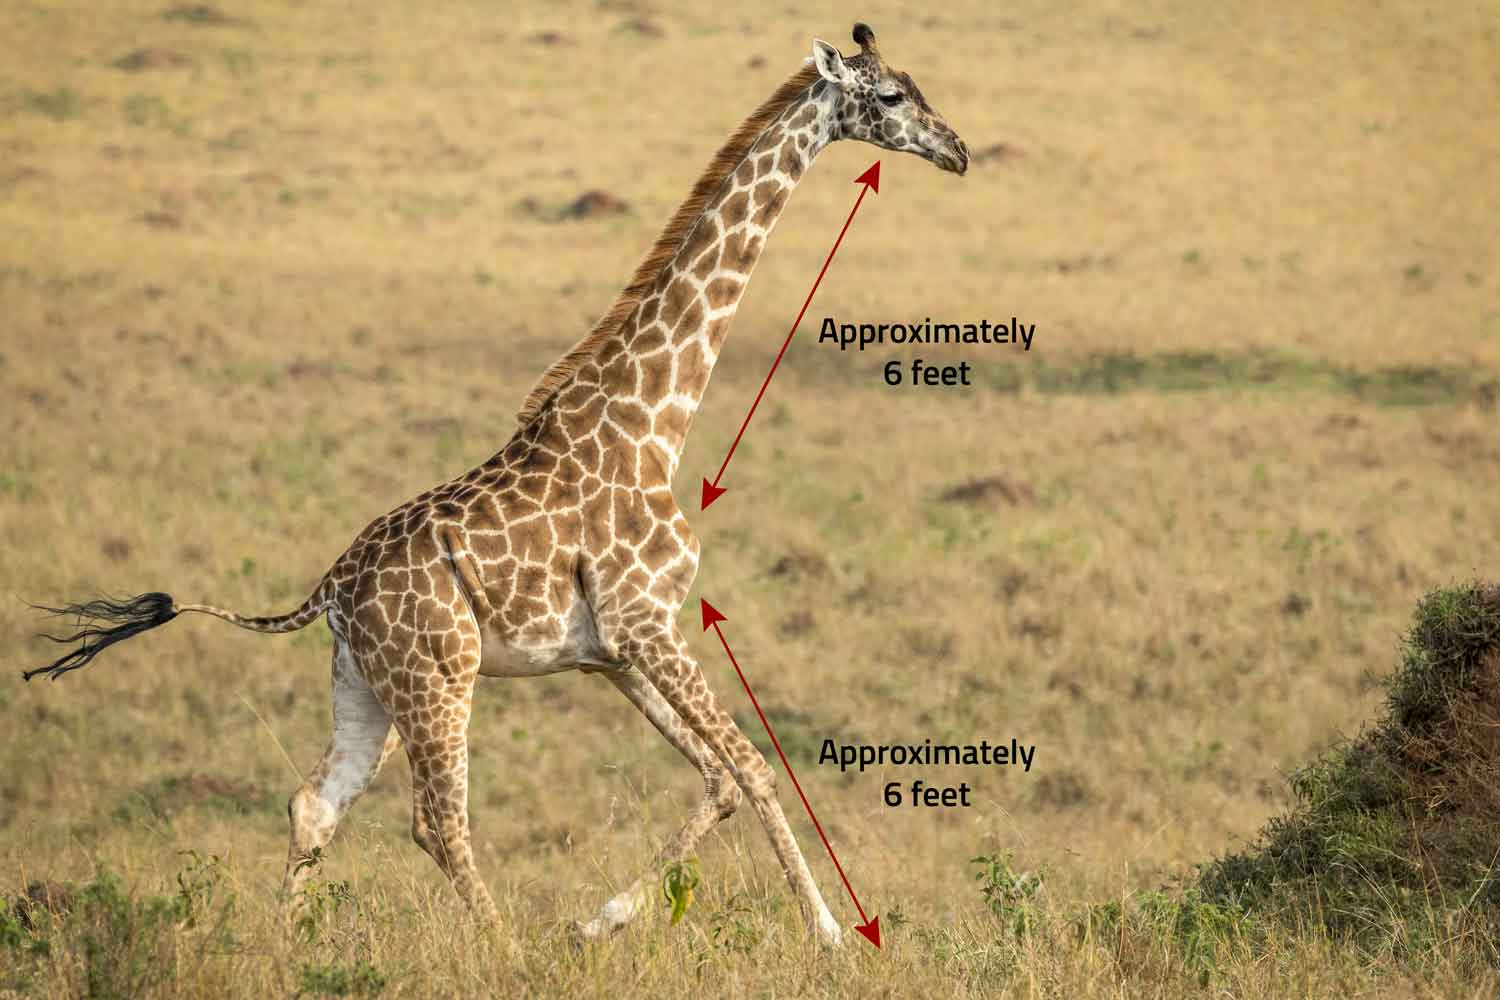 A giraffe walking in grass with labels showing its neck and legs are approximately six feet long.